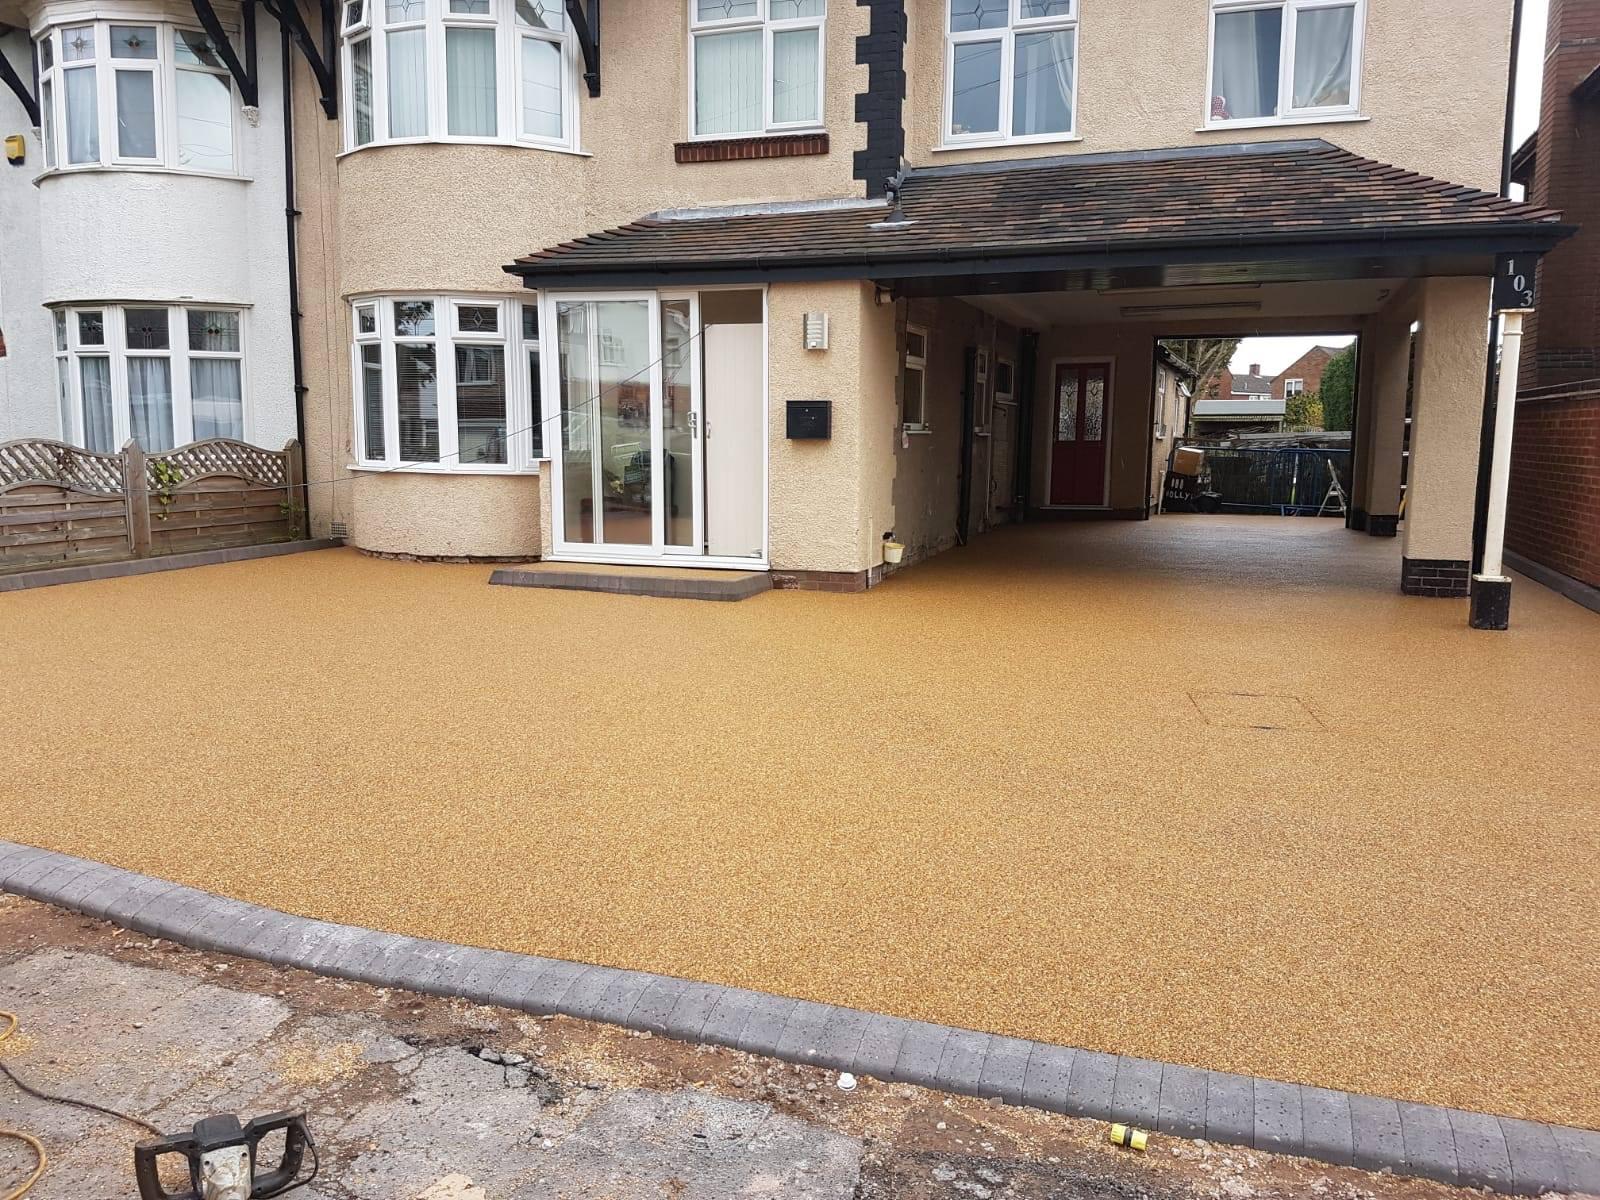 driveway services in telford - artprint concrete - based in Shropshire